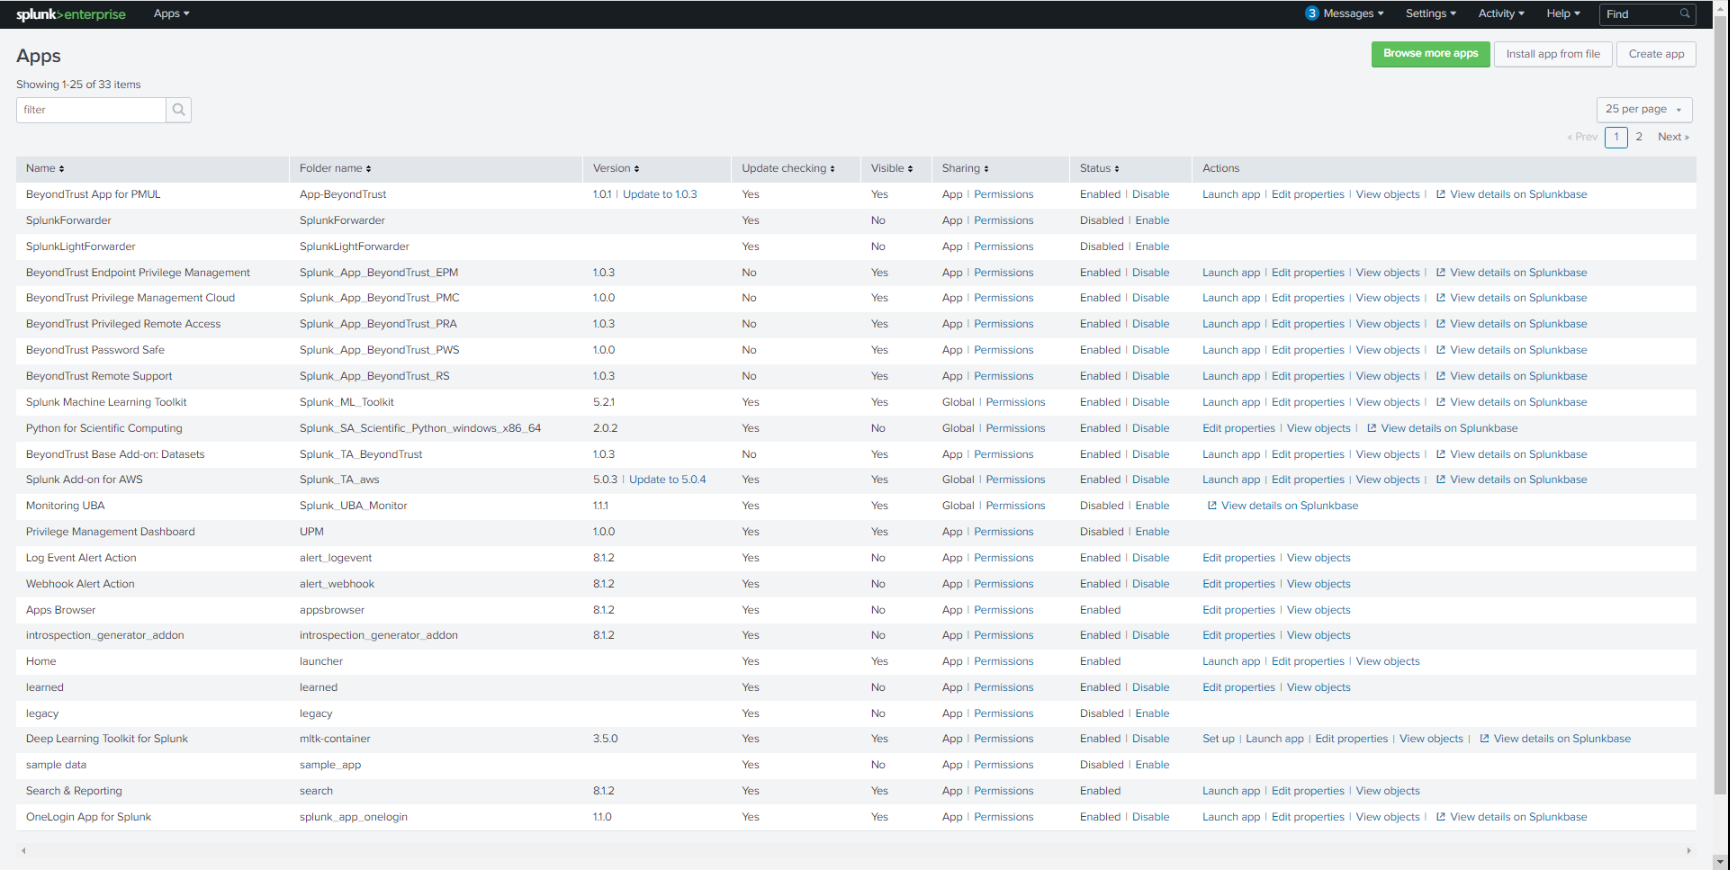 Browse apps in Splunk to find the Password Safe app.